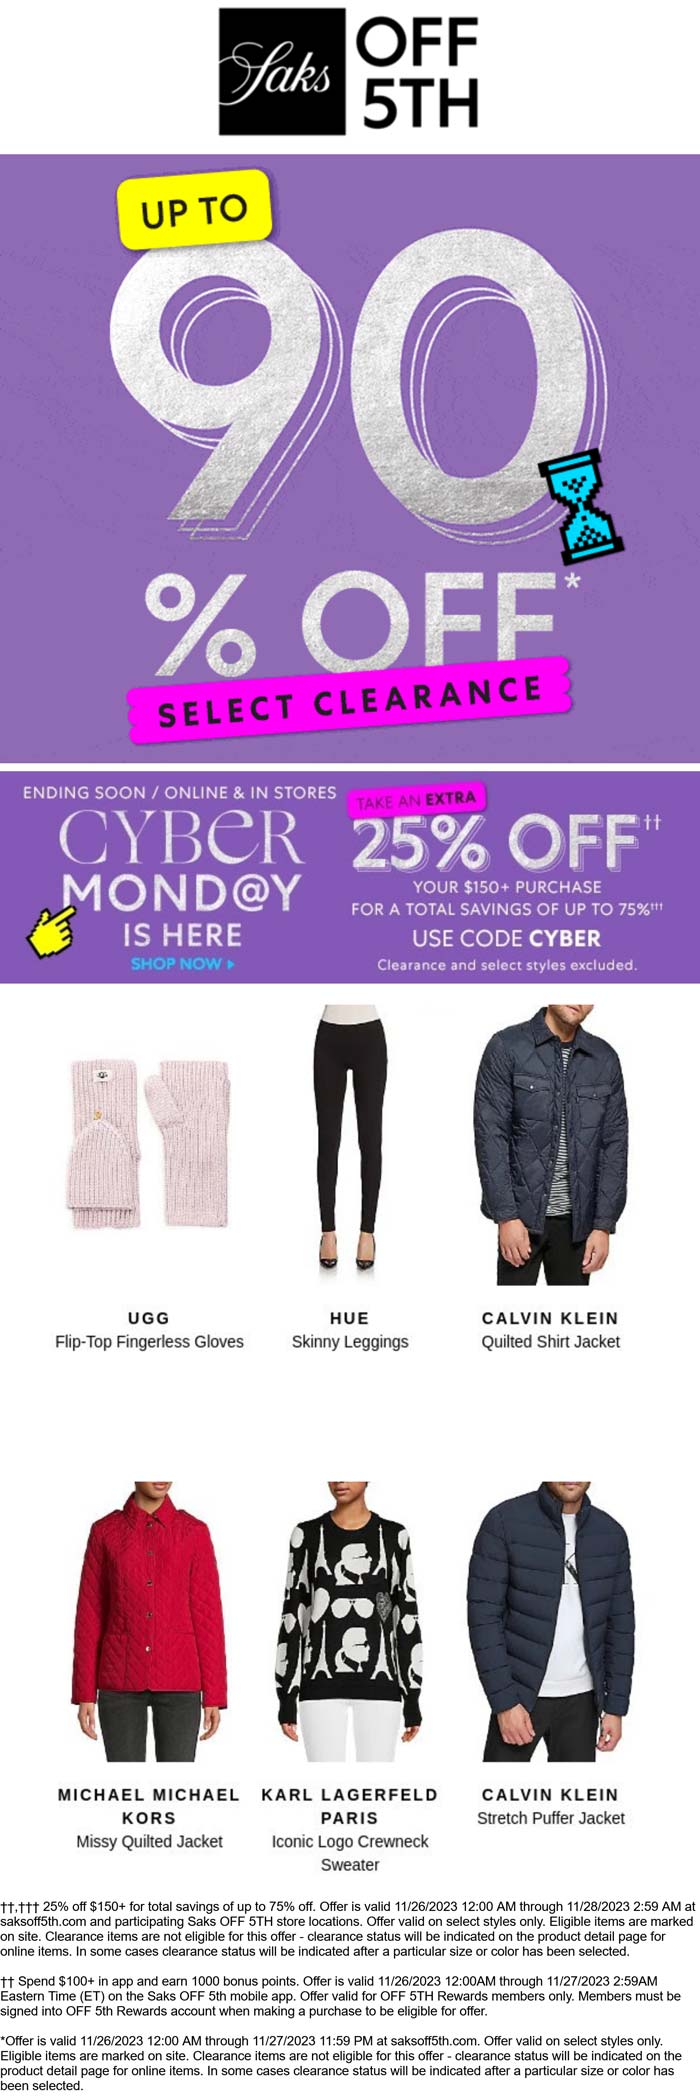 Saks OFF 5TH stores Coupon  Extra 90% off clearance & 25% off $150 at Saks OFF 5TH via promo code CYBER #saksoff5th 